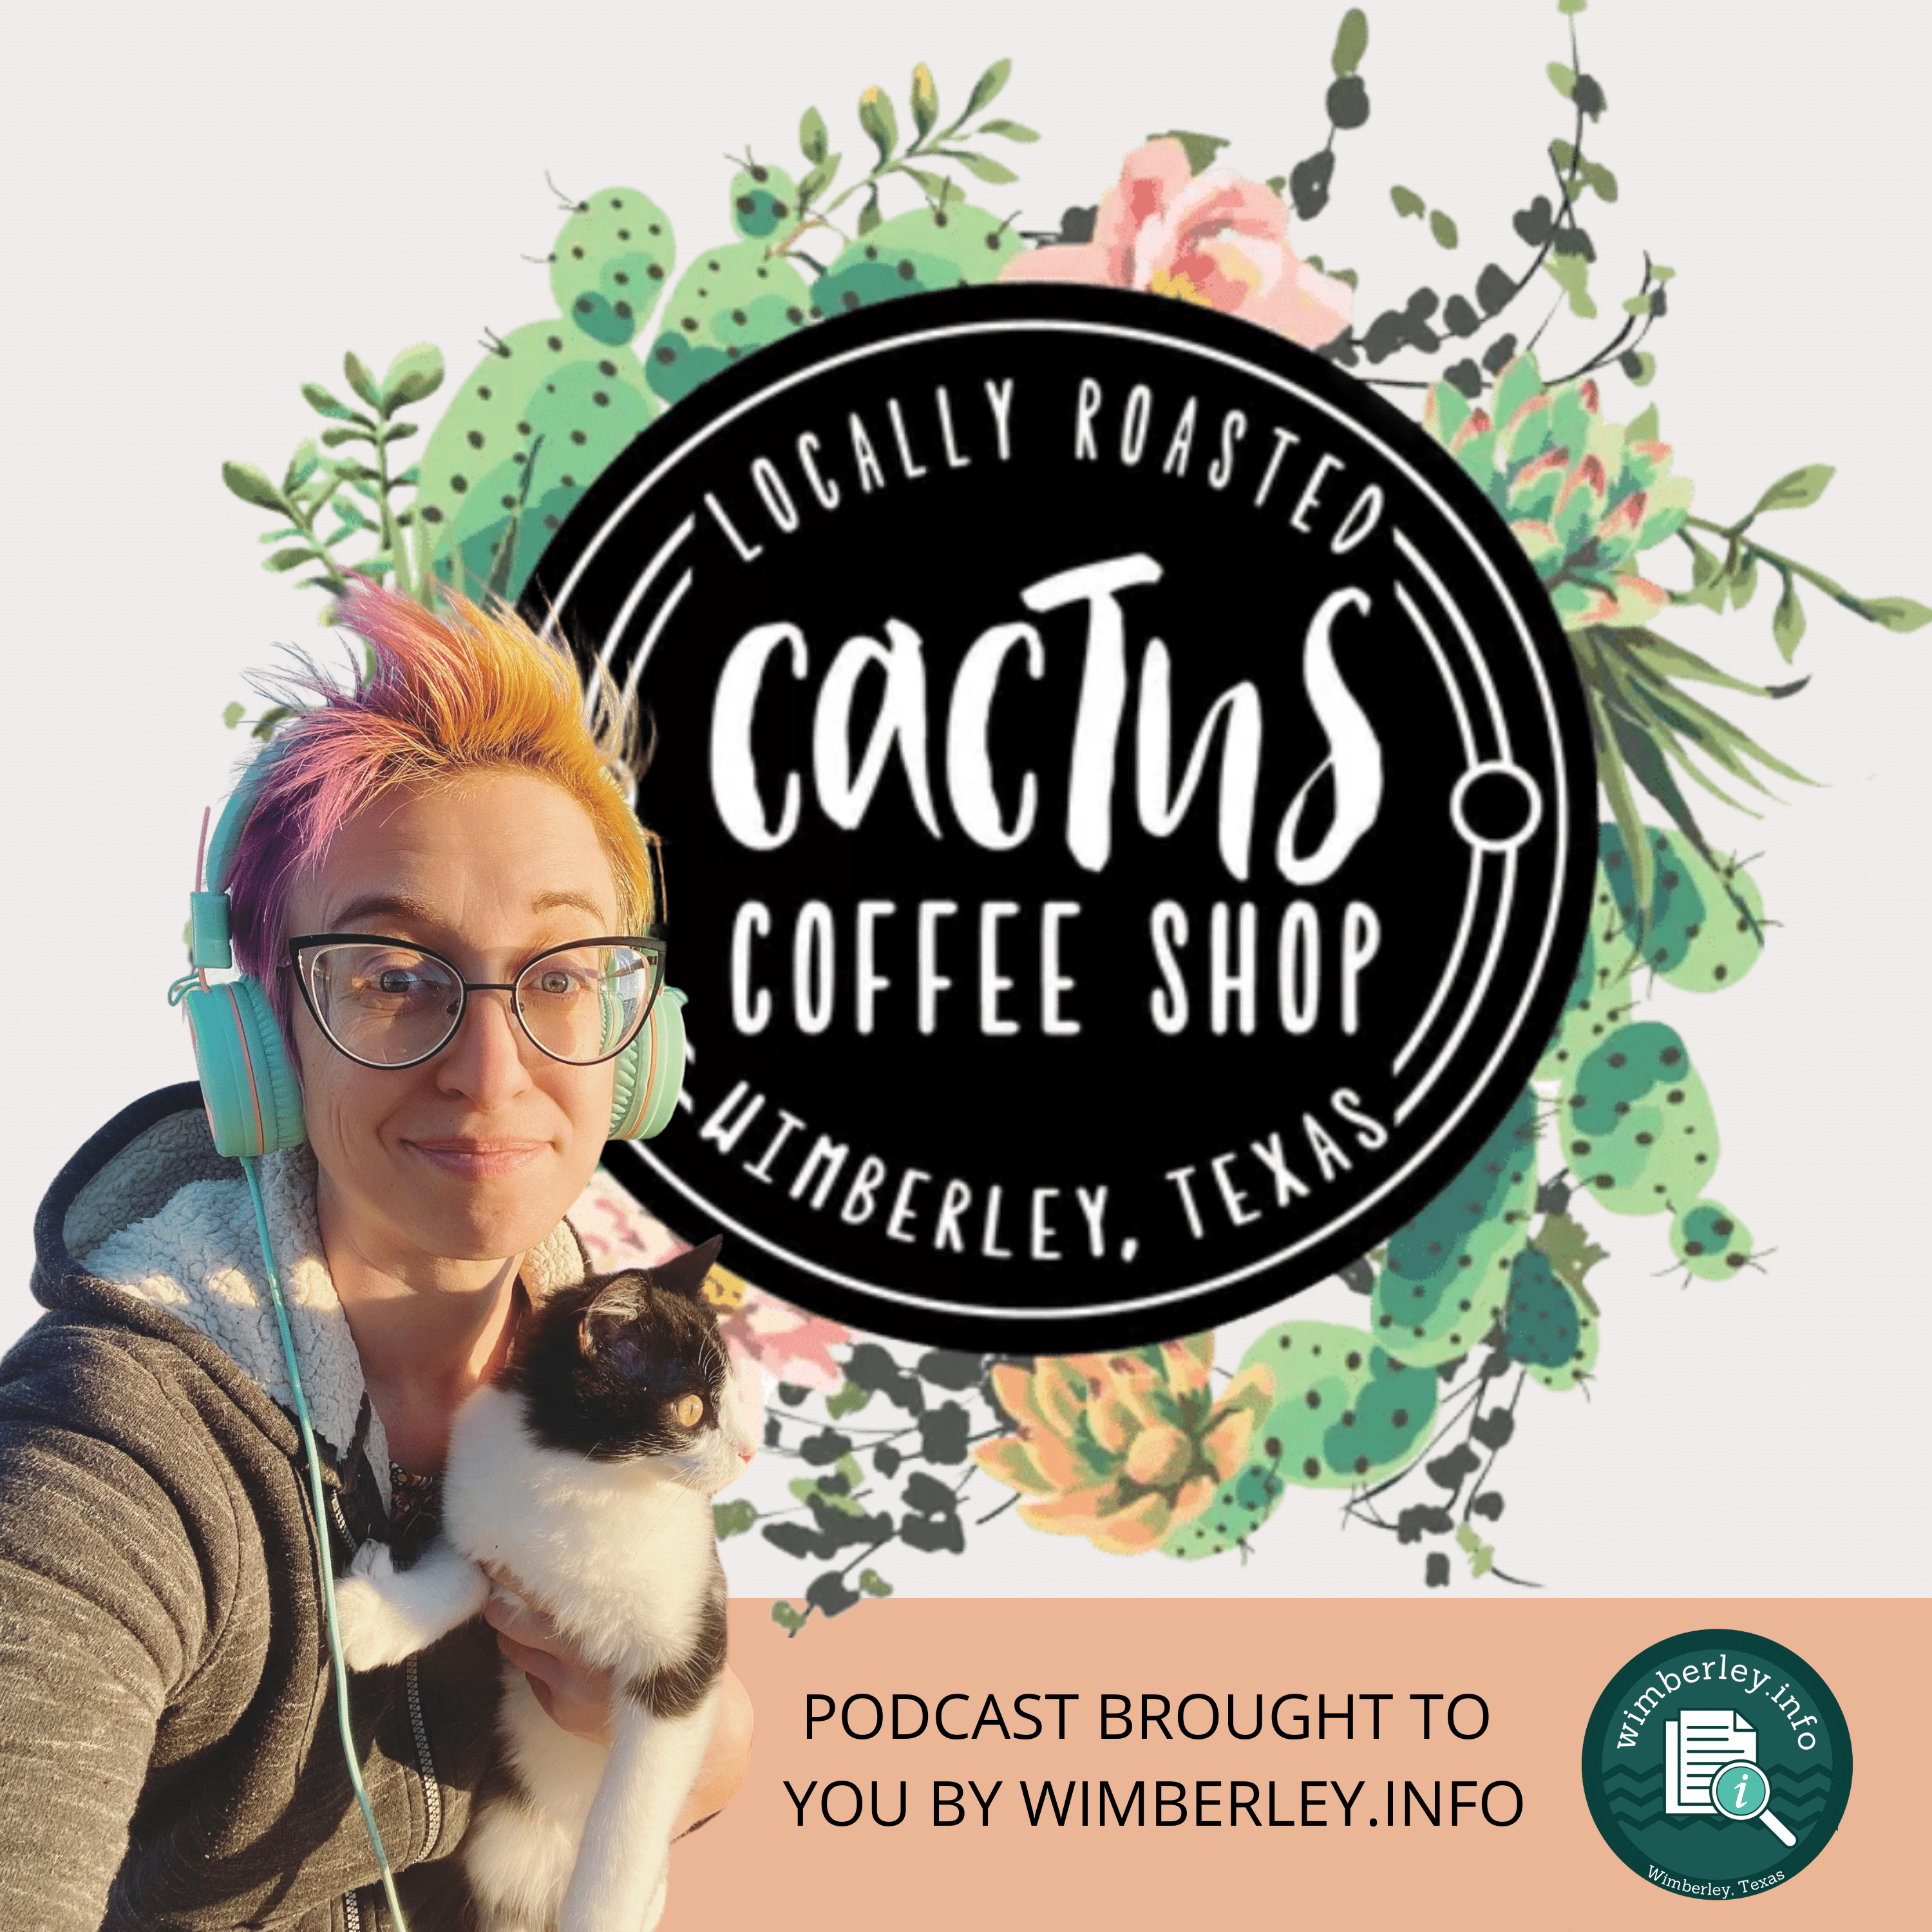 Cactus Coffee Shop Collaborates With Wimberley.info To Launch New Podcast